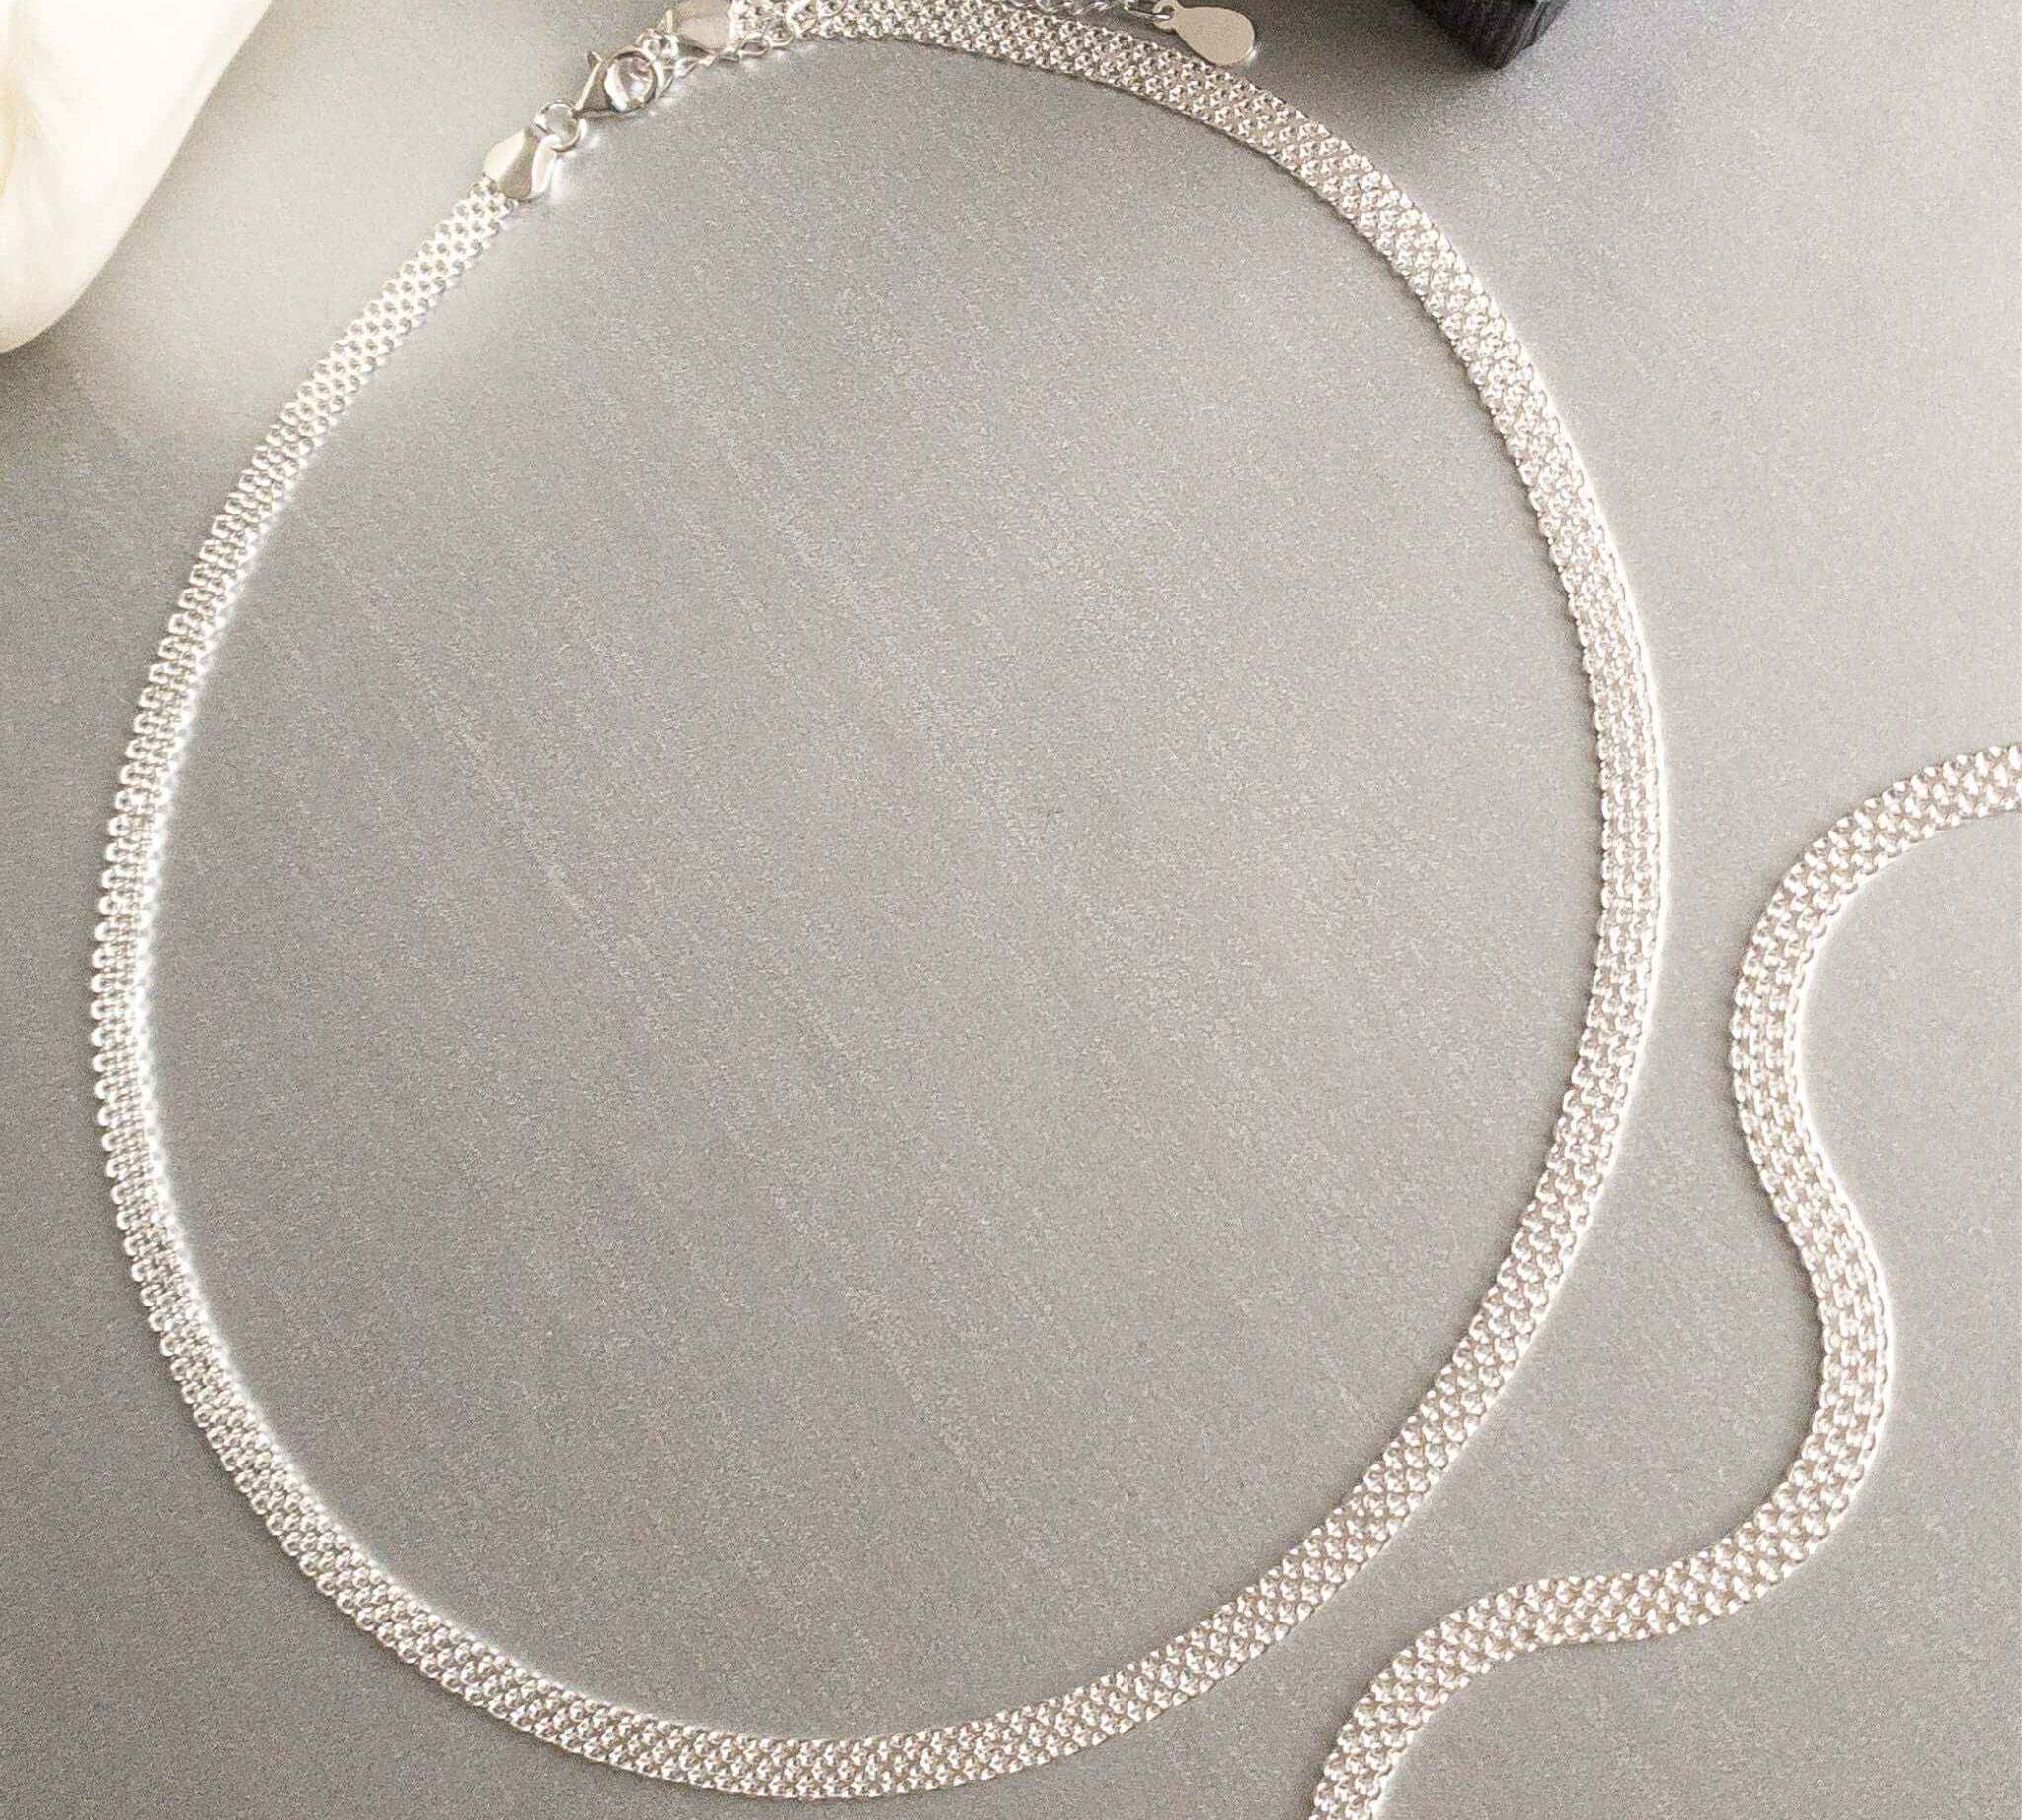 Close-up of chic Silver Mesh Choker Necklace by Alessandra James.